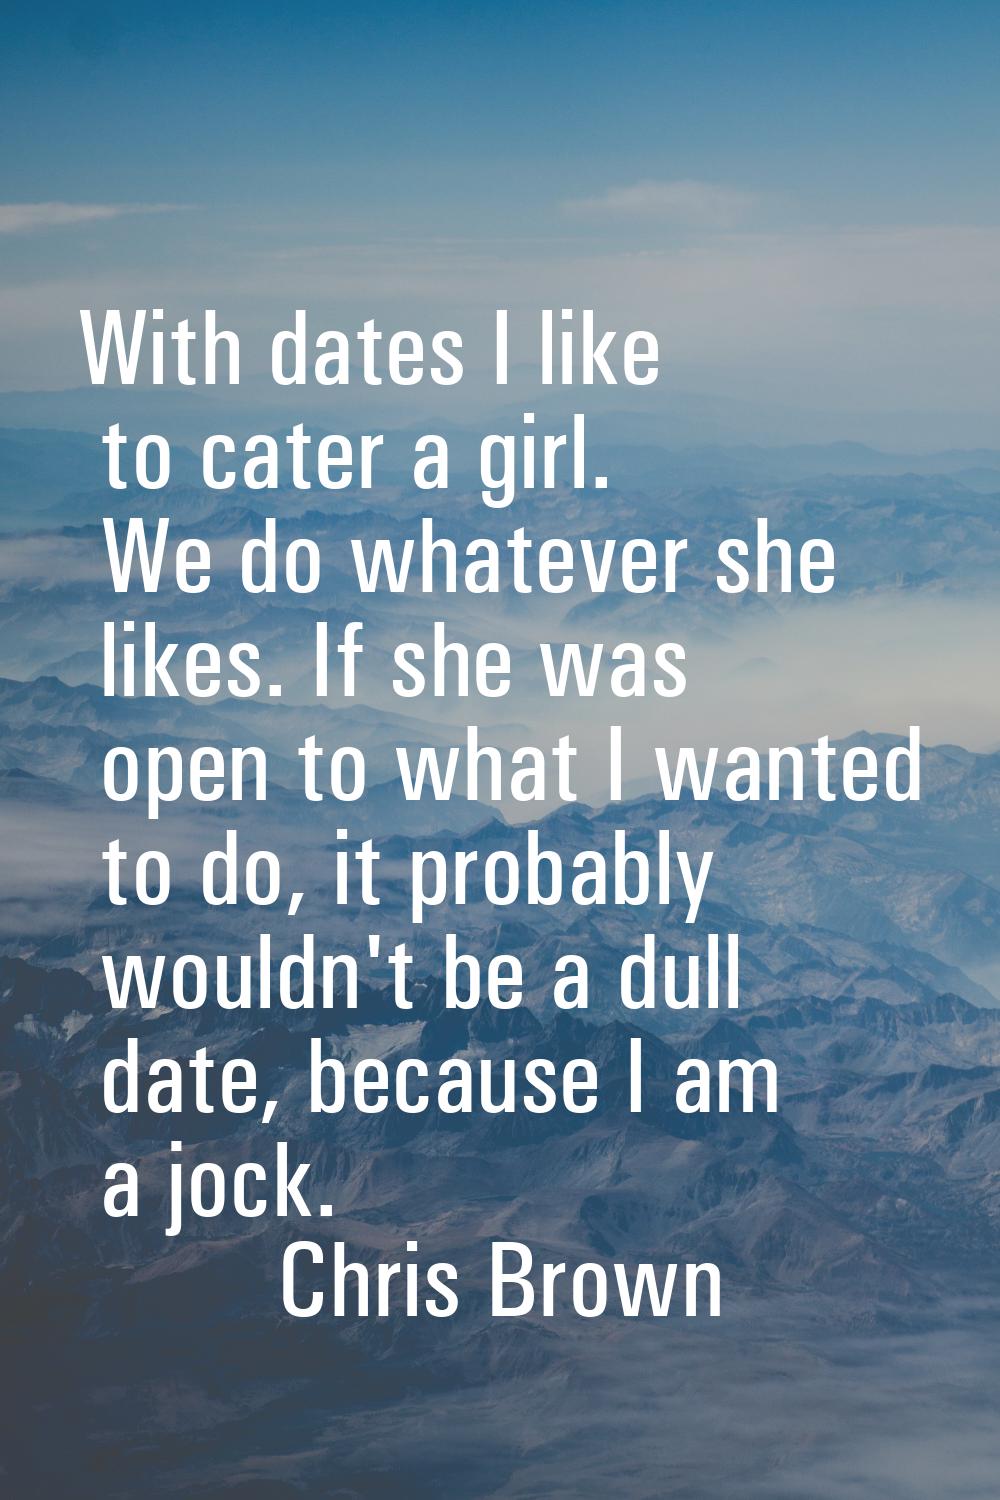 With dates I like to cater a girl. We do whatever she likes. If she was open to what I wanted to do